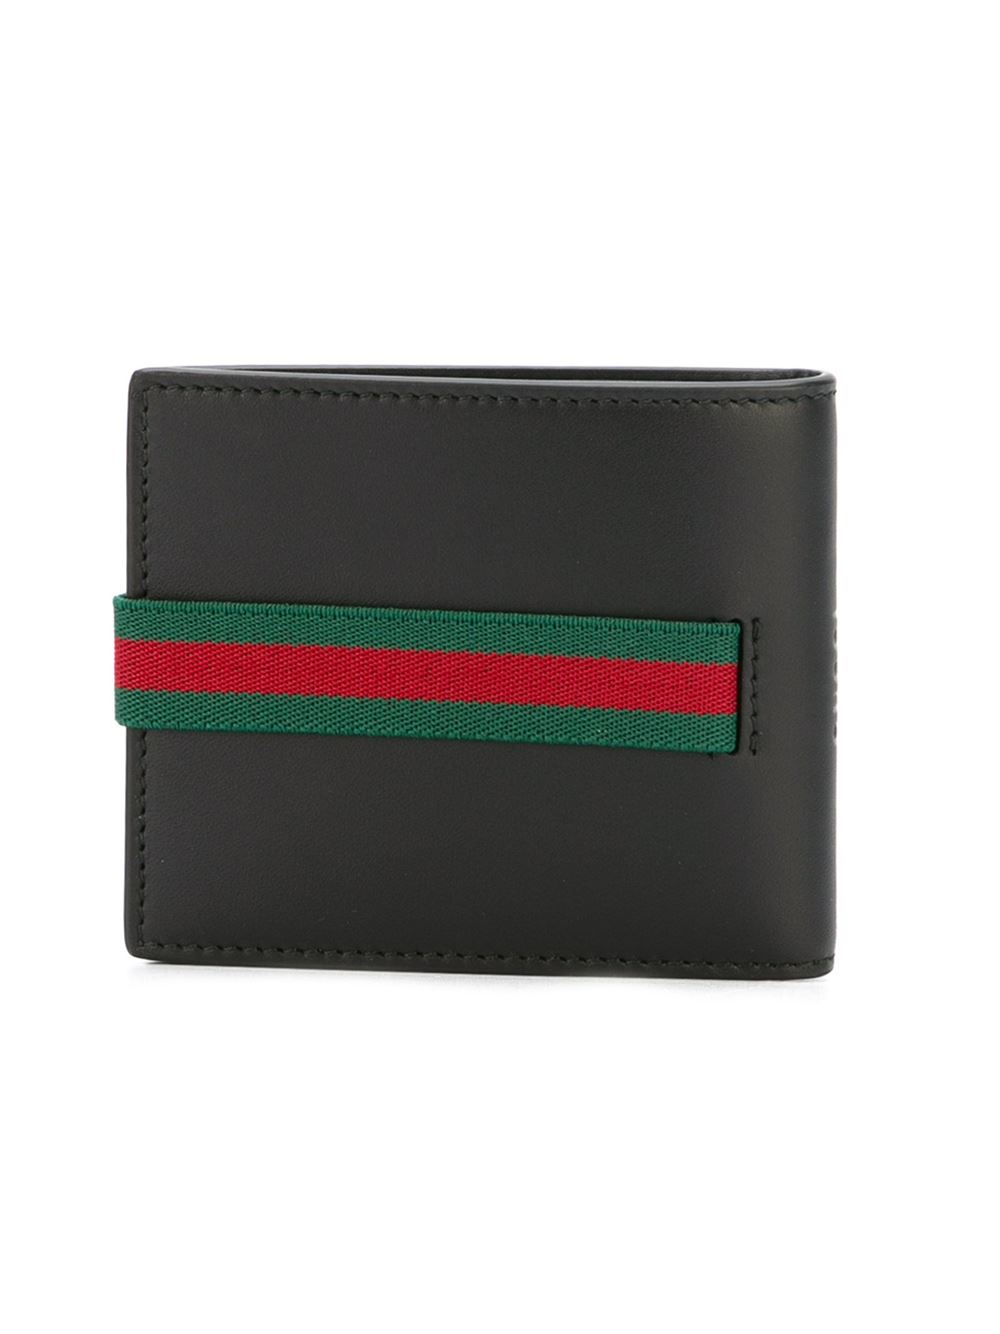 Gucci Leather Elastic Wallet in Red for Men - Lyst